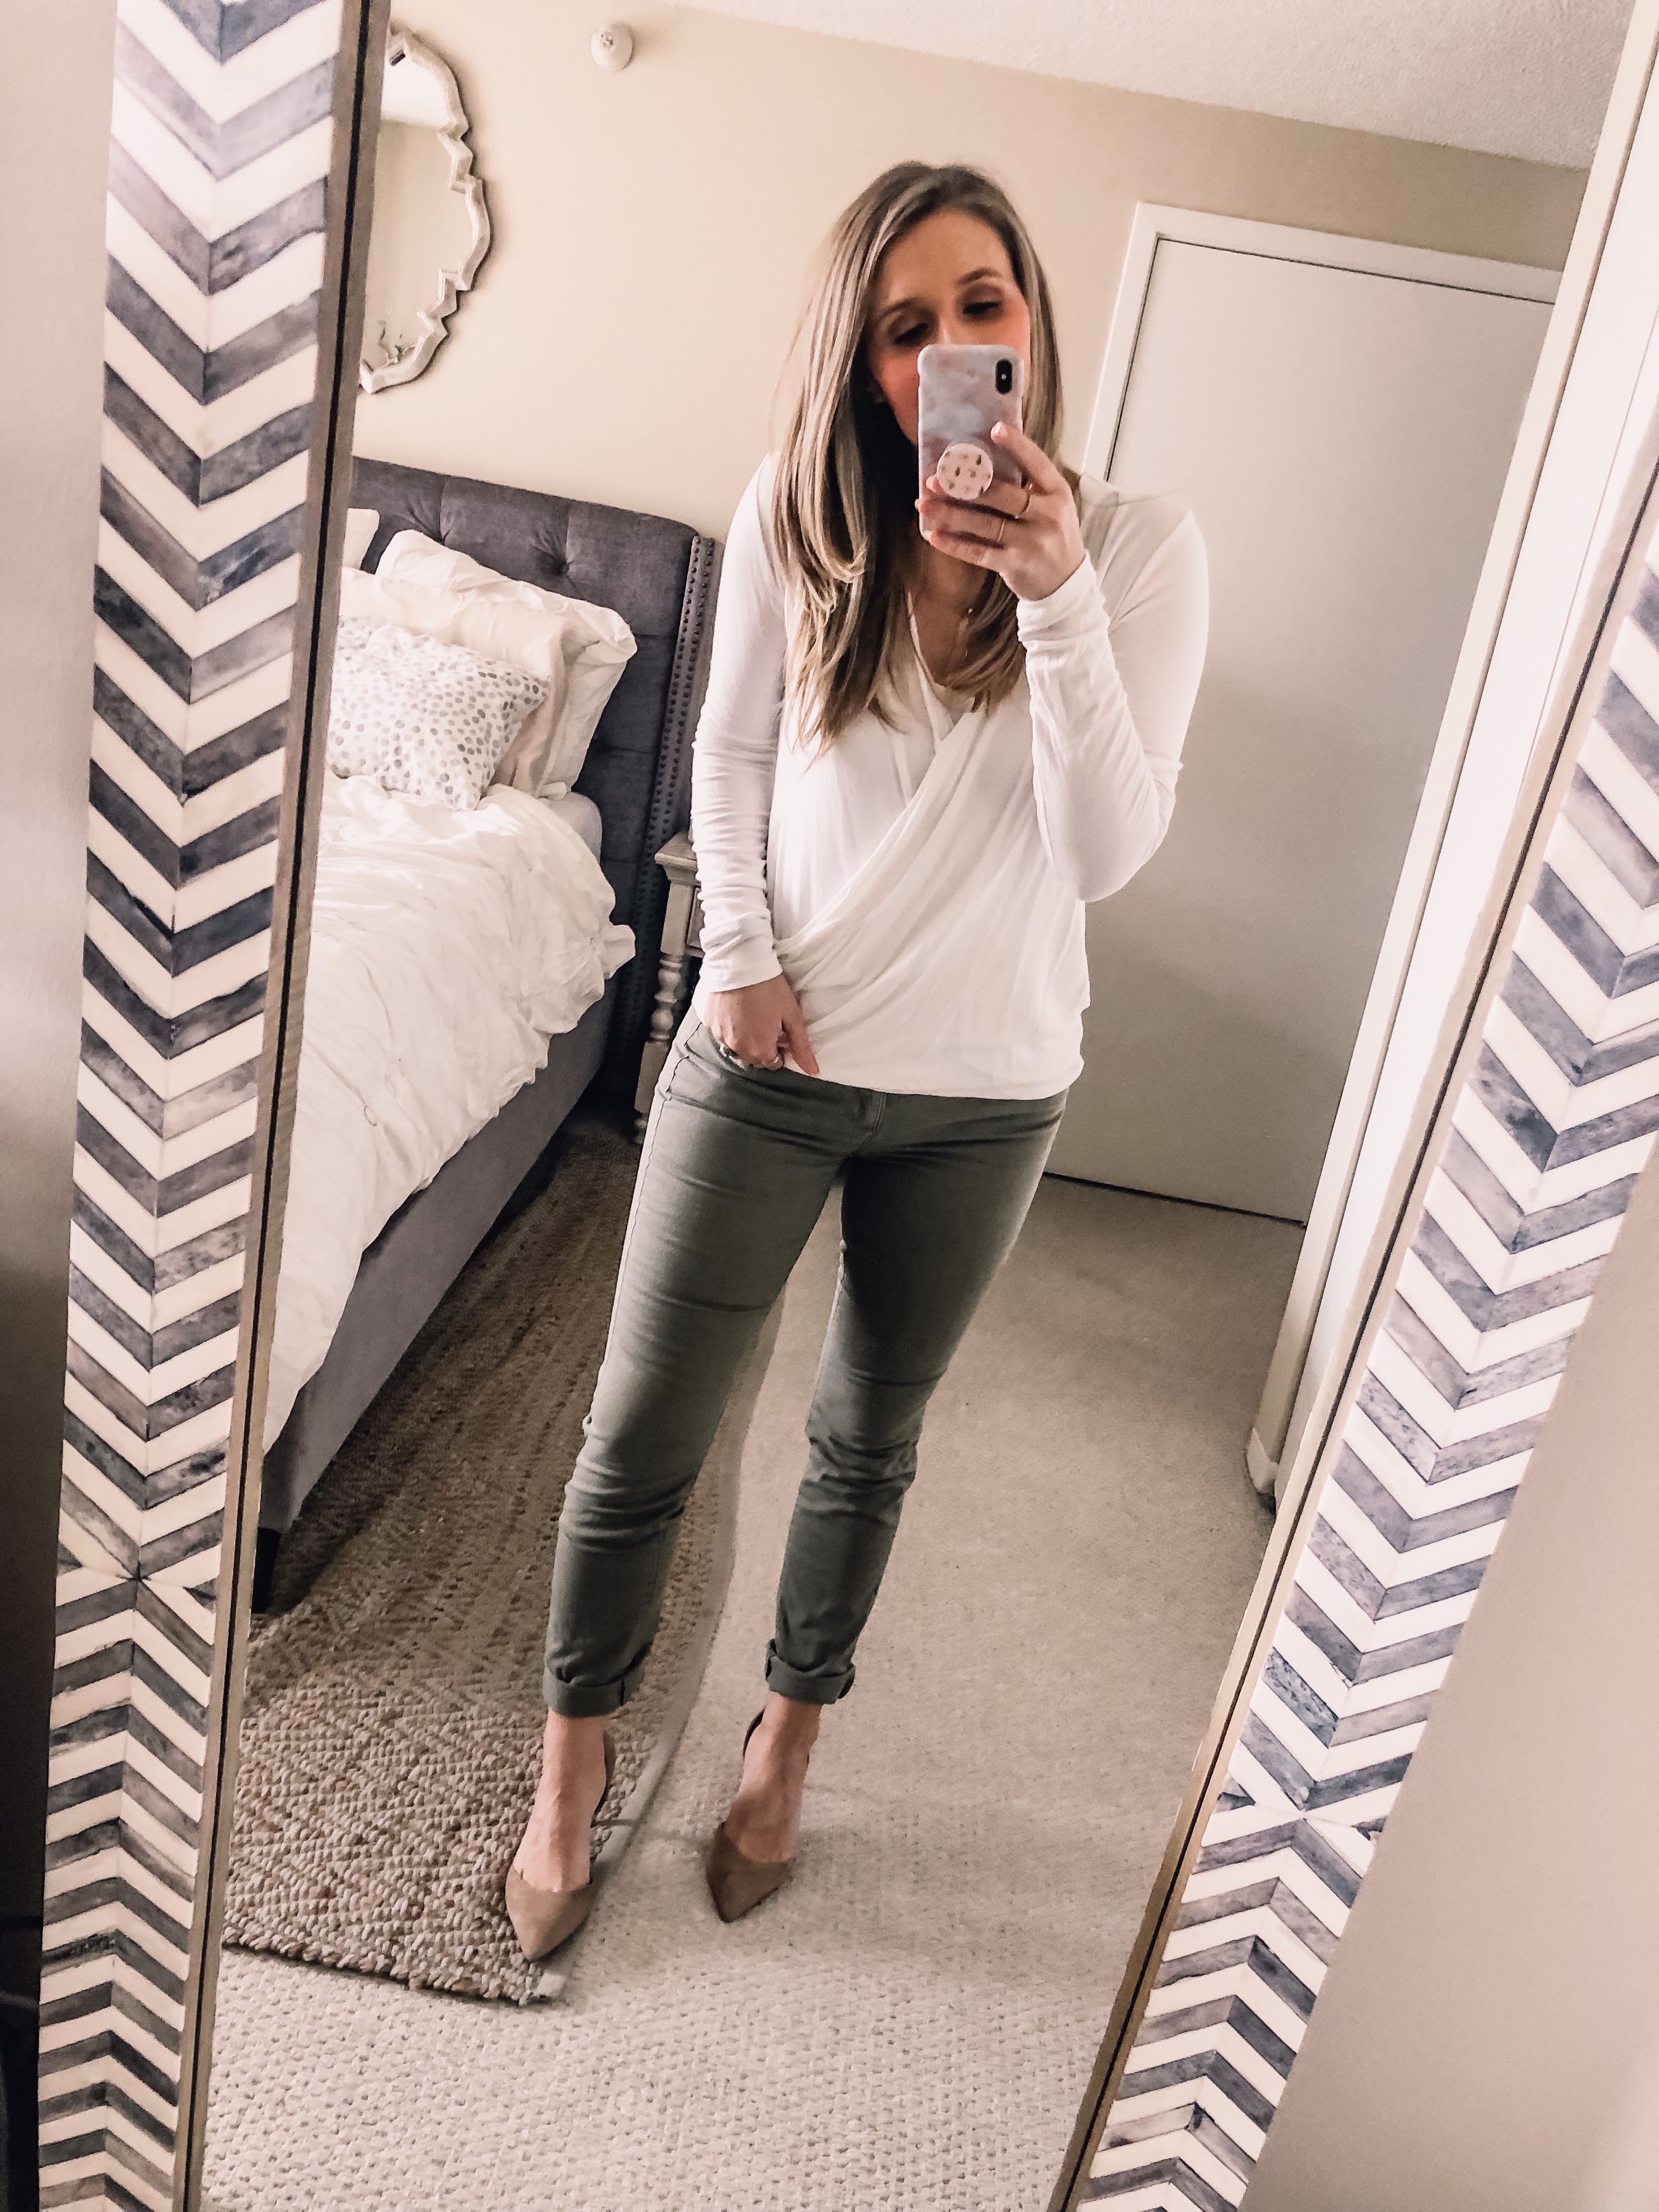 most flattering work blouse and affordable pumps